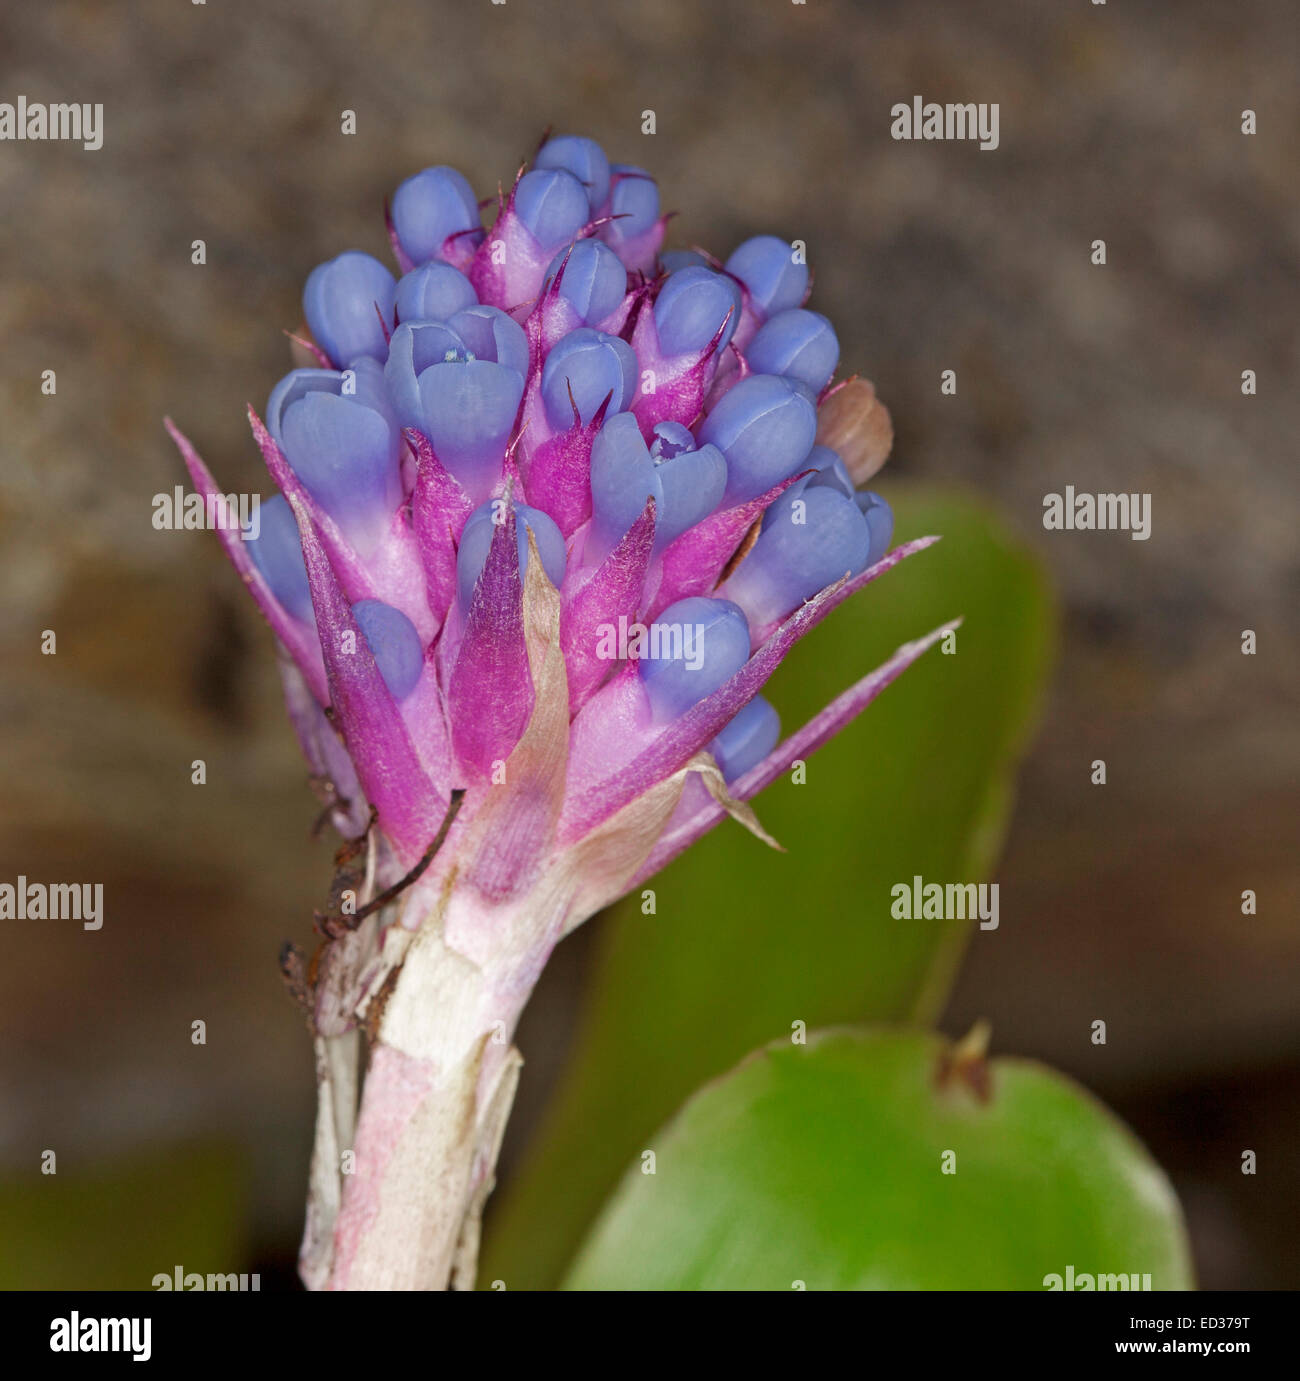 Cluster of vivid blue flowers surrounded by bright pink bracts of Bromeliad, Aechmea cylindrata, against grey / green background Stock Photo